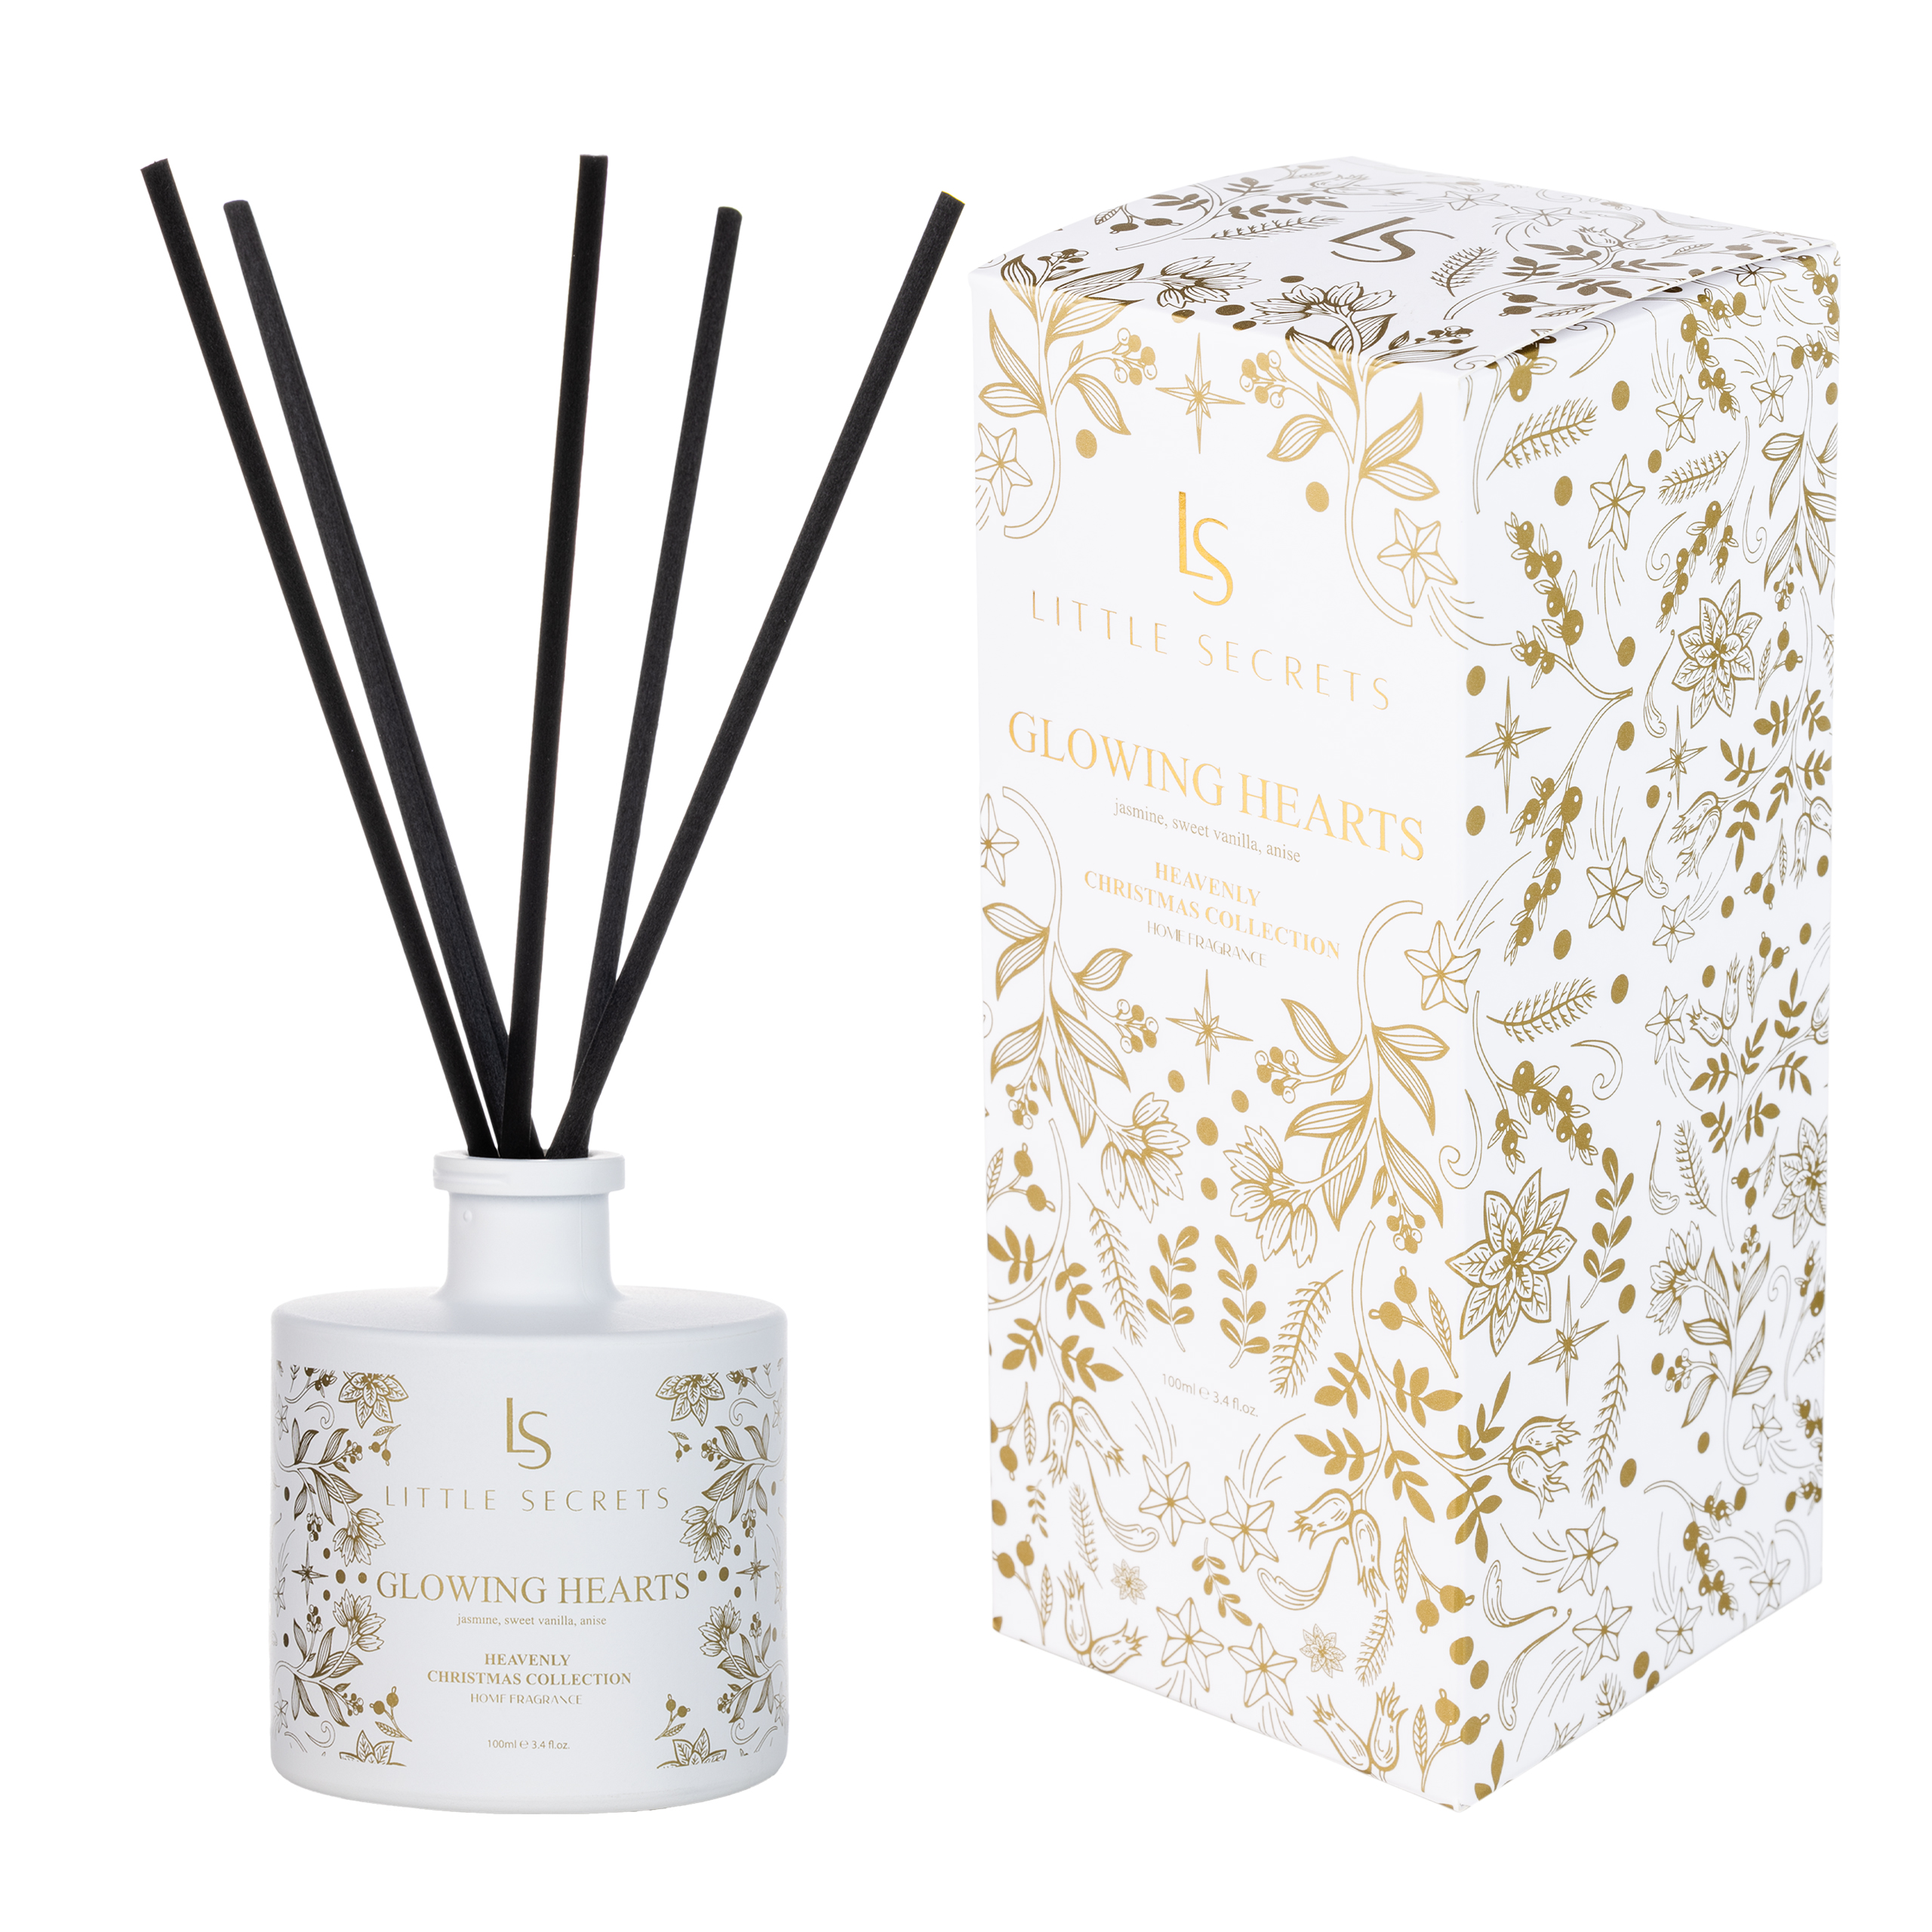 Glowing Hearts Home Diffuser Heavenly Collection